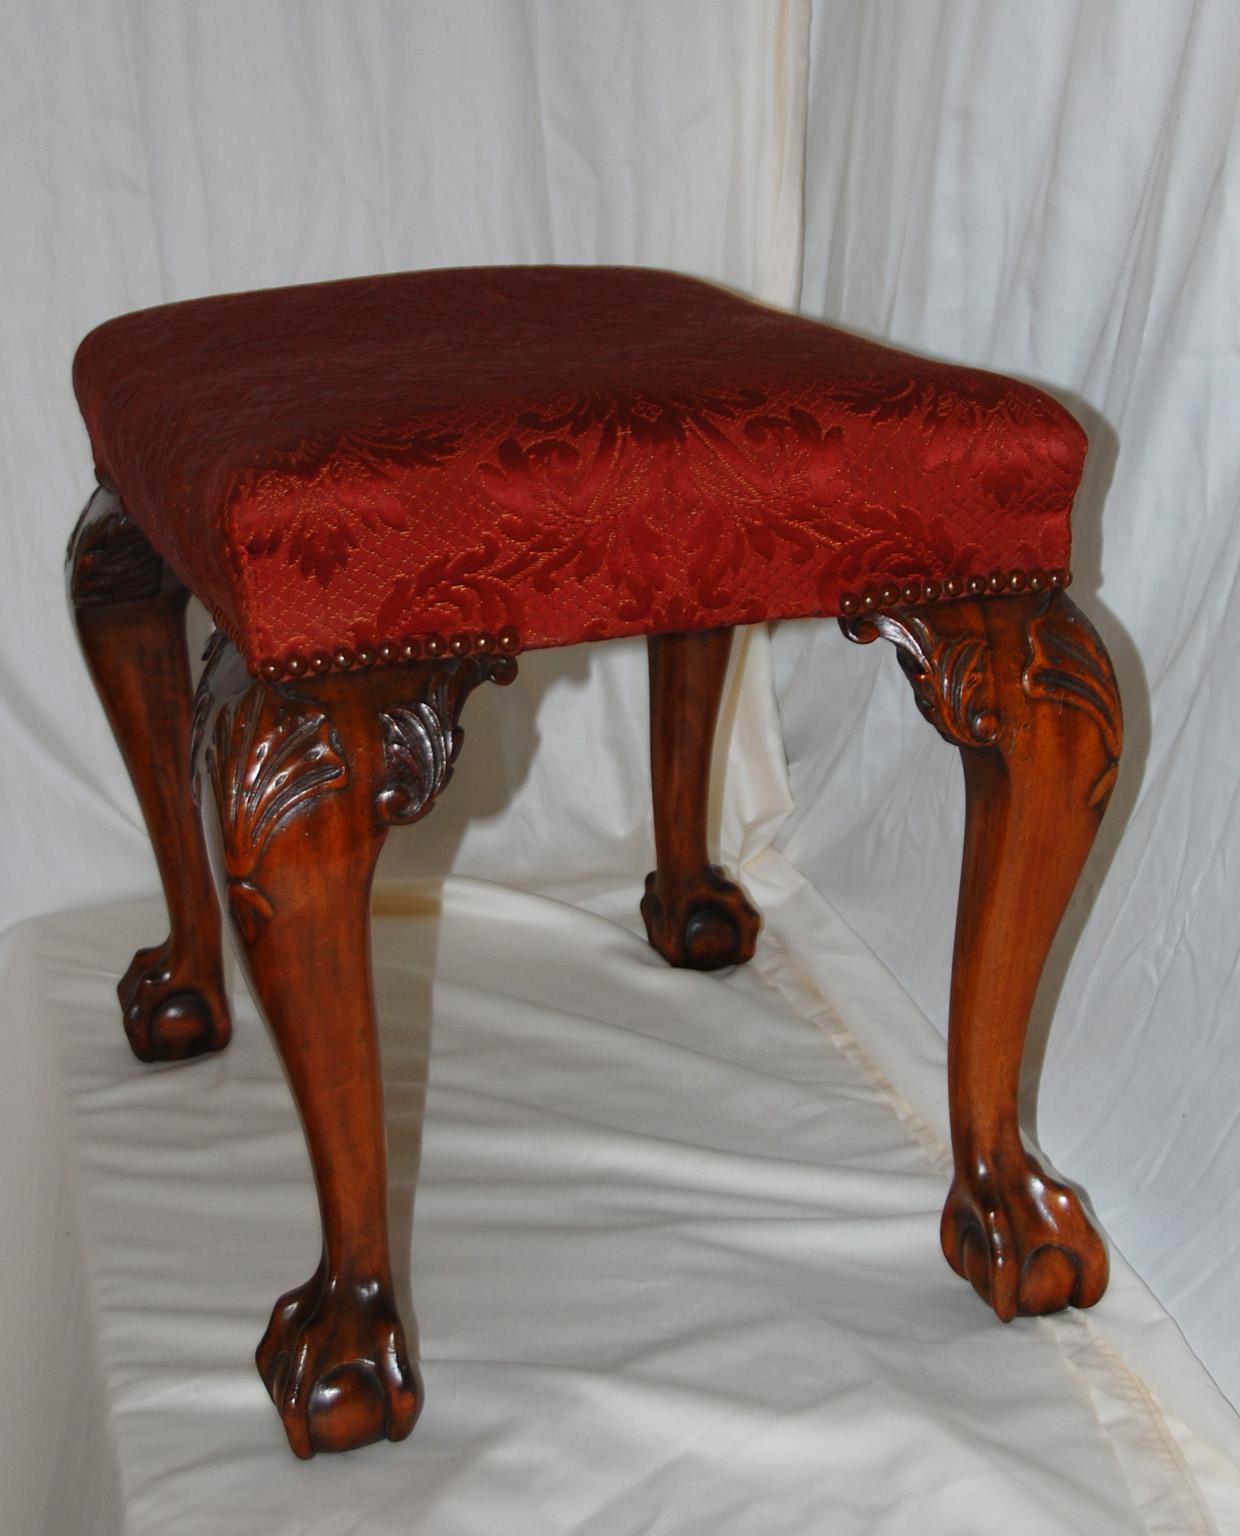 English Chippendale style mahogany upholstered stool with carved cabriole legs, ball and claw feet and shell carved knees. This substantial stool conforms well with the Chippendale style, having high quality timber, well carved detailing and classic